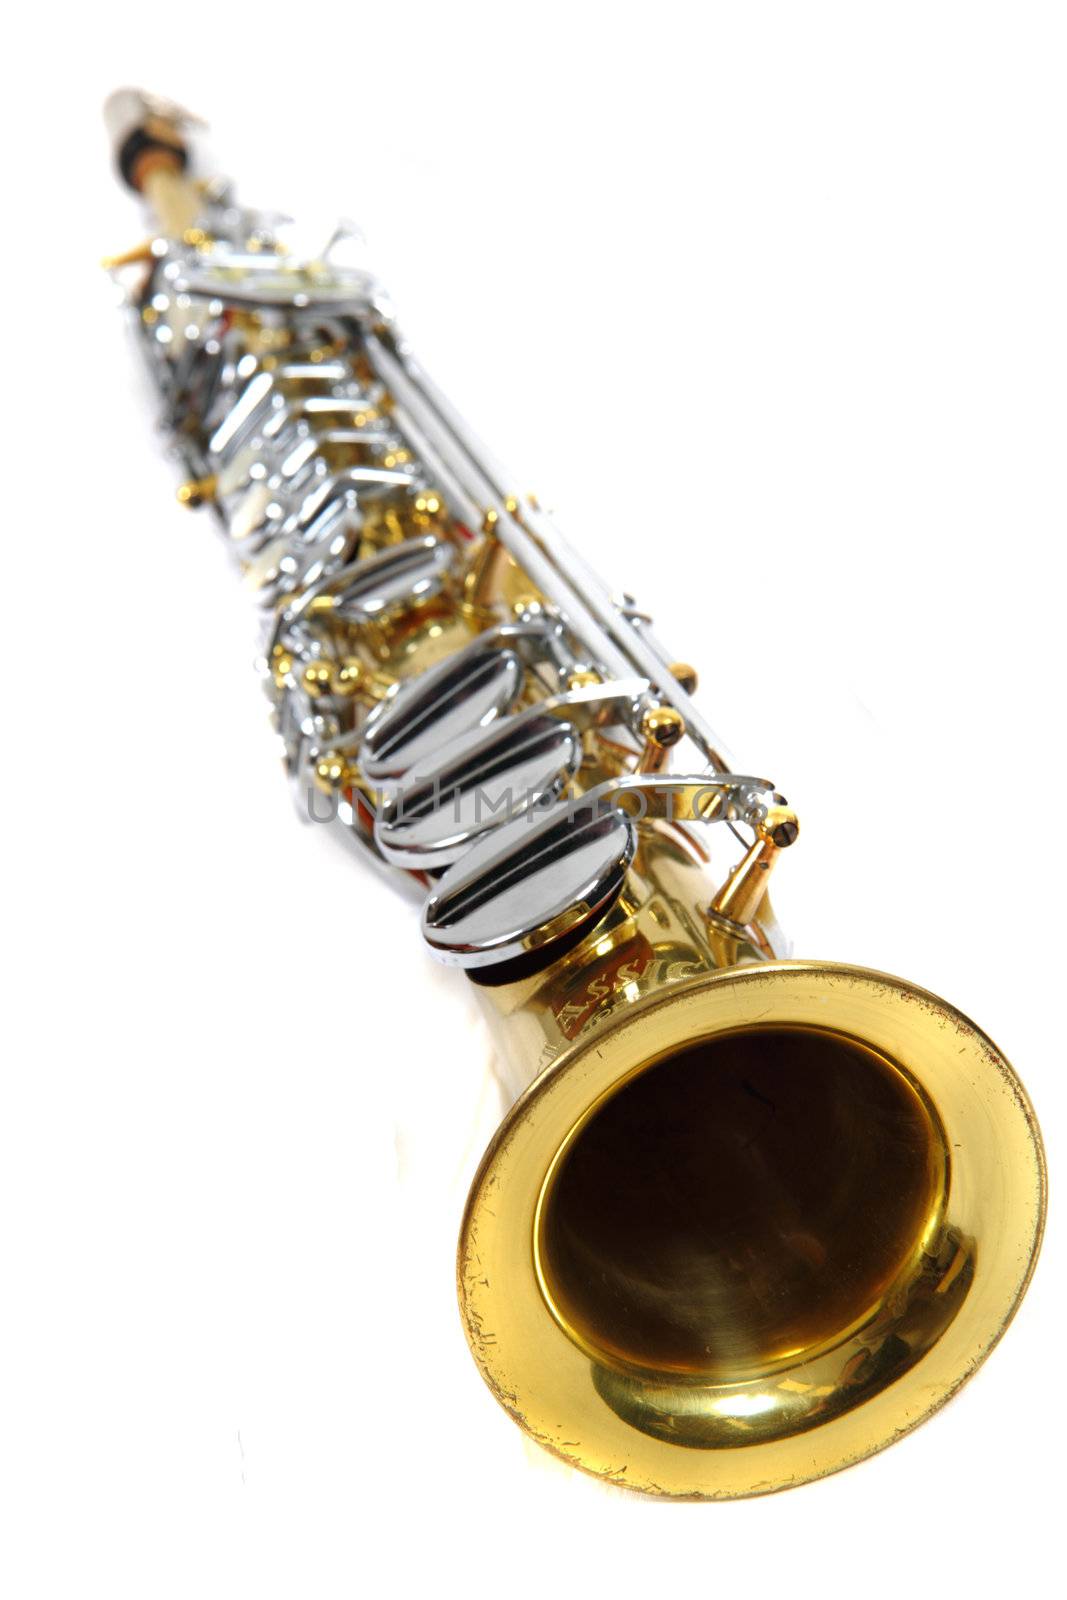 clarinet music instrument isolated on the white background